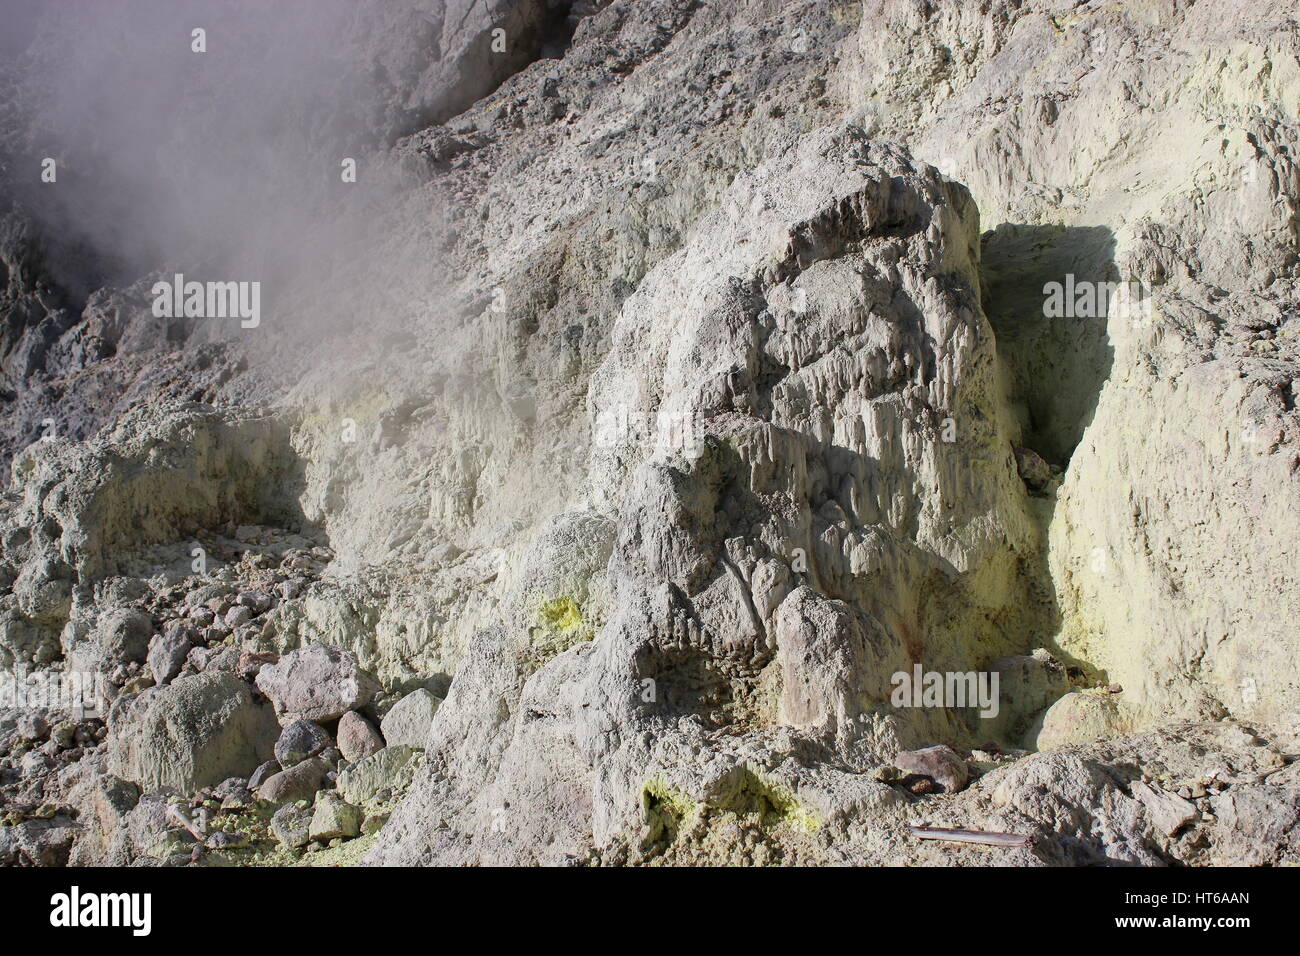 A hissing sulphur vent in the crater of Mount Sibayak, Brestagi, Northern Sumatra, Indonesia Stock Photo